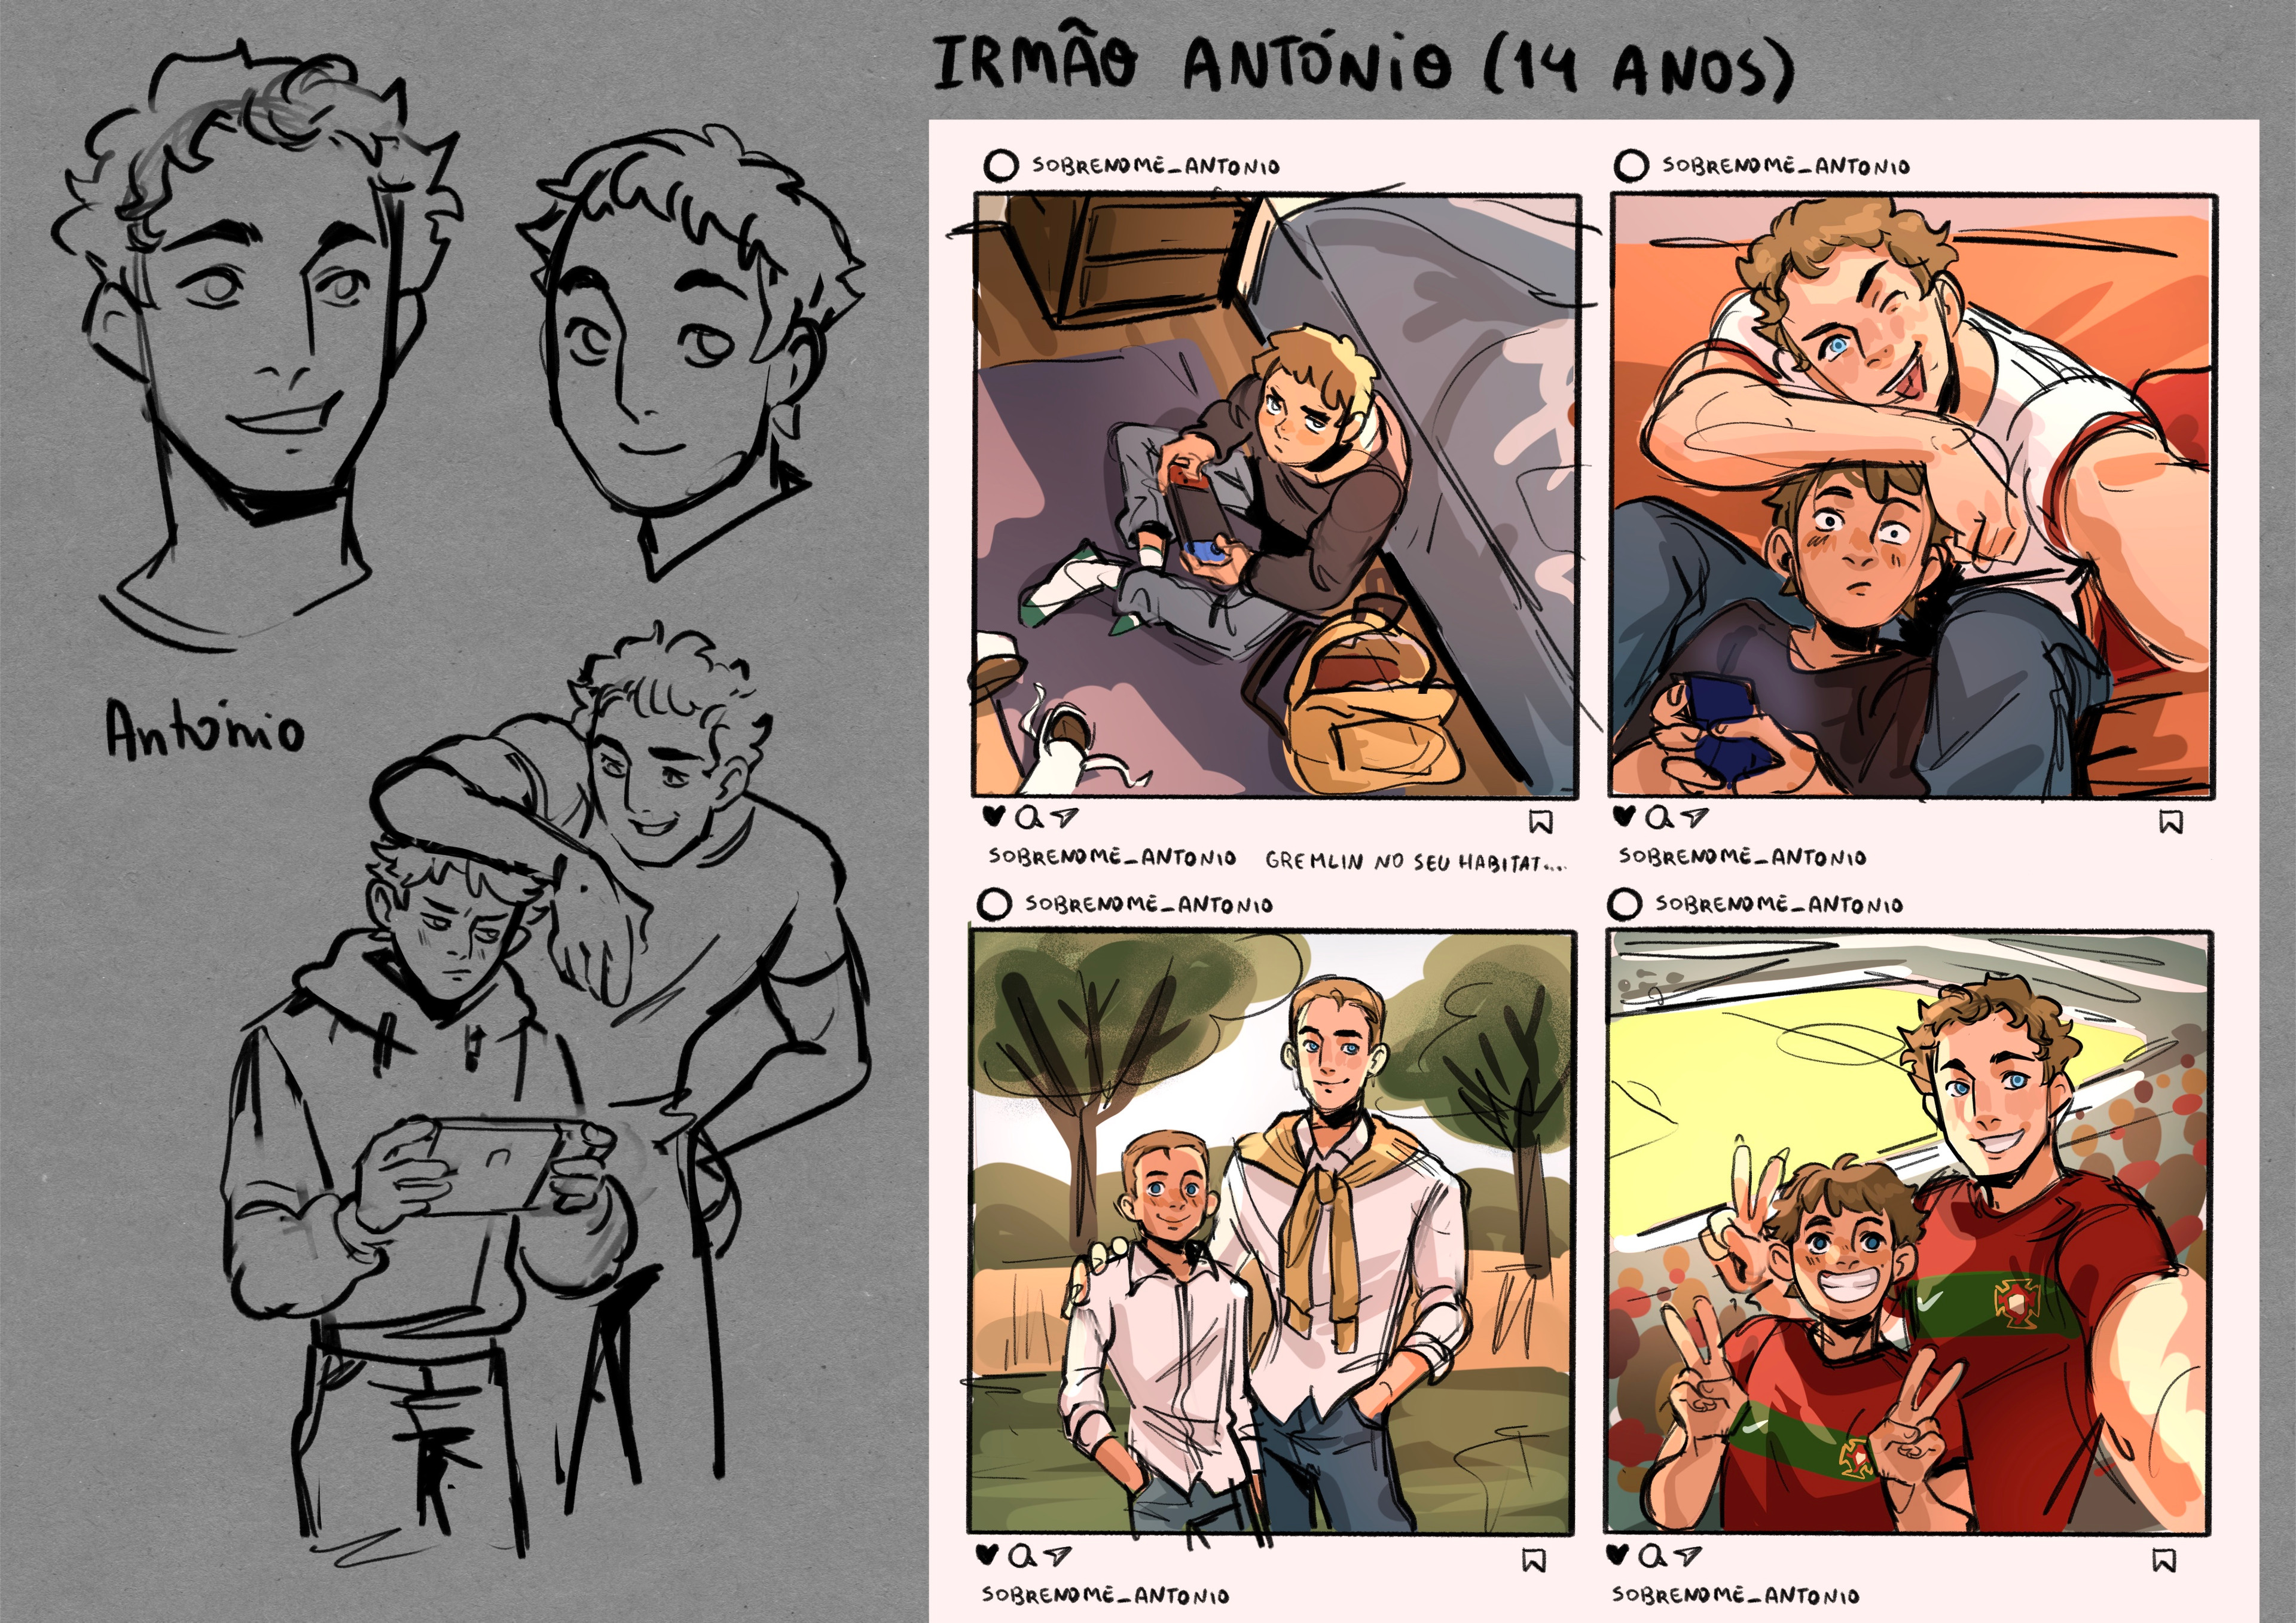 At this point the story was almost ready, I started doing exploration for family members and any character that could appear more. Antonio’s brother was definitely my favorite, I had a lot of fun thinking about different scenarios for the socialmedia pics